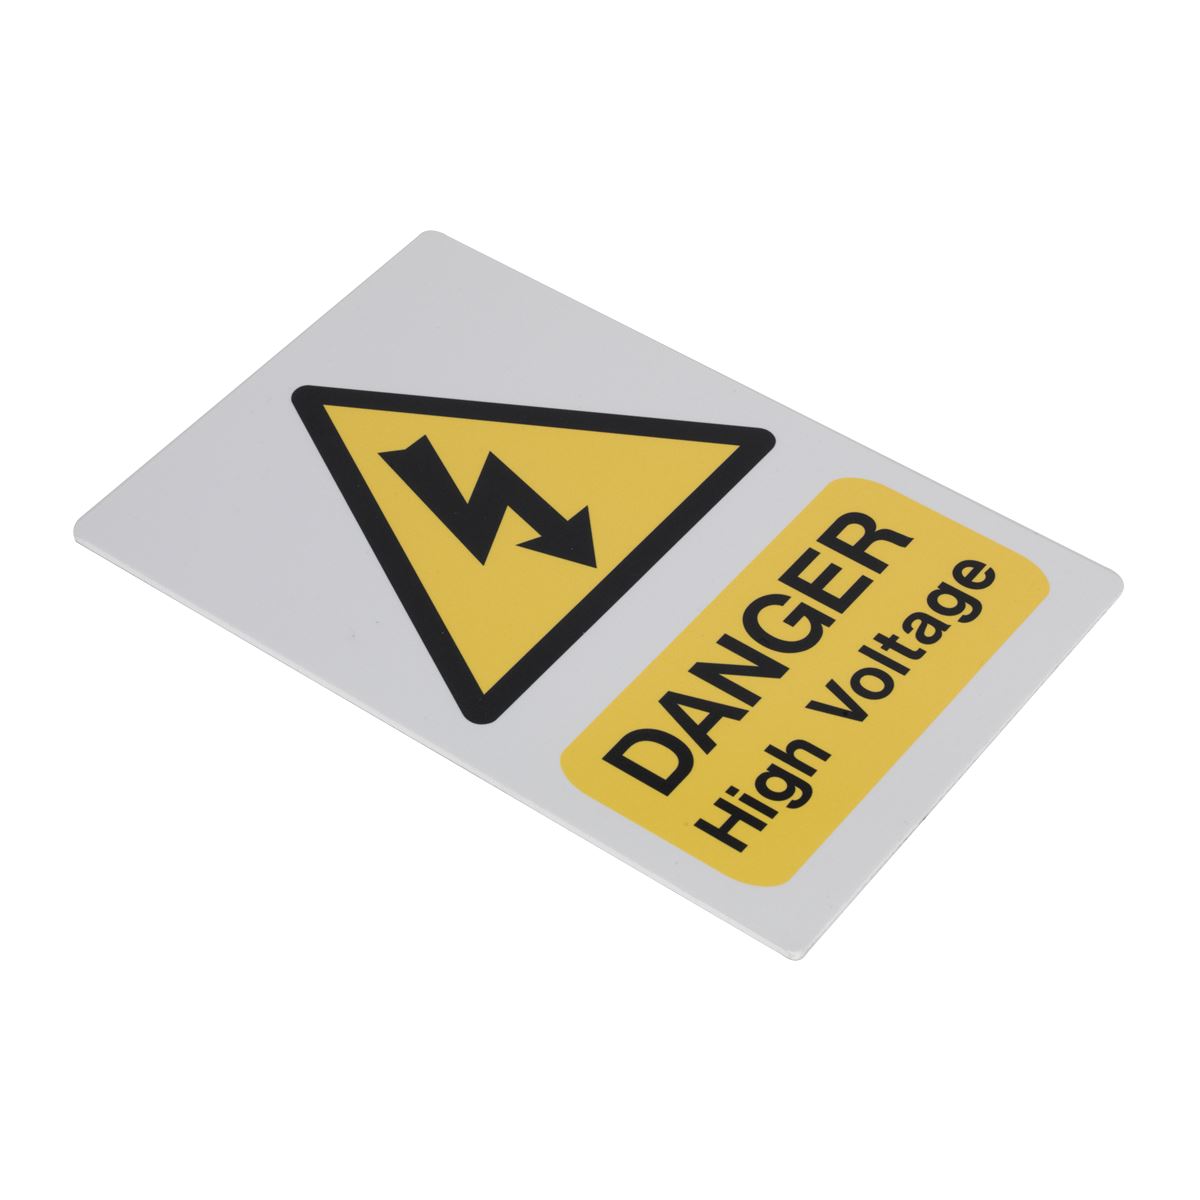 Sealey High Voltage Warning Sign 200 x 300mm